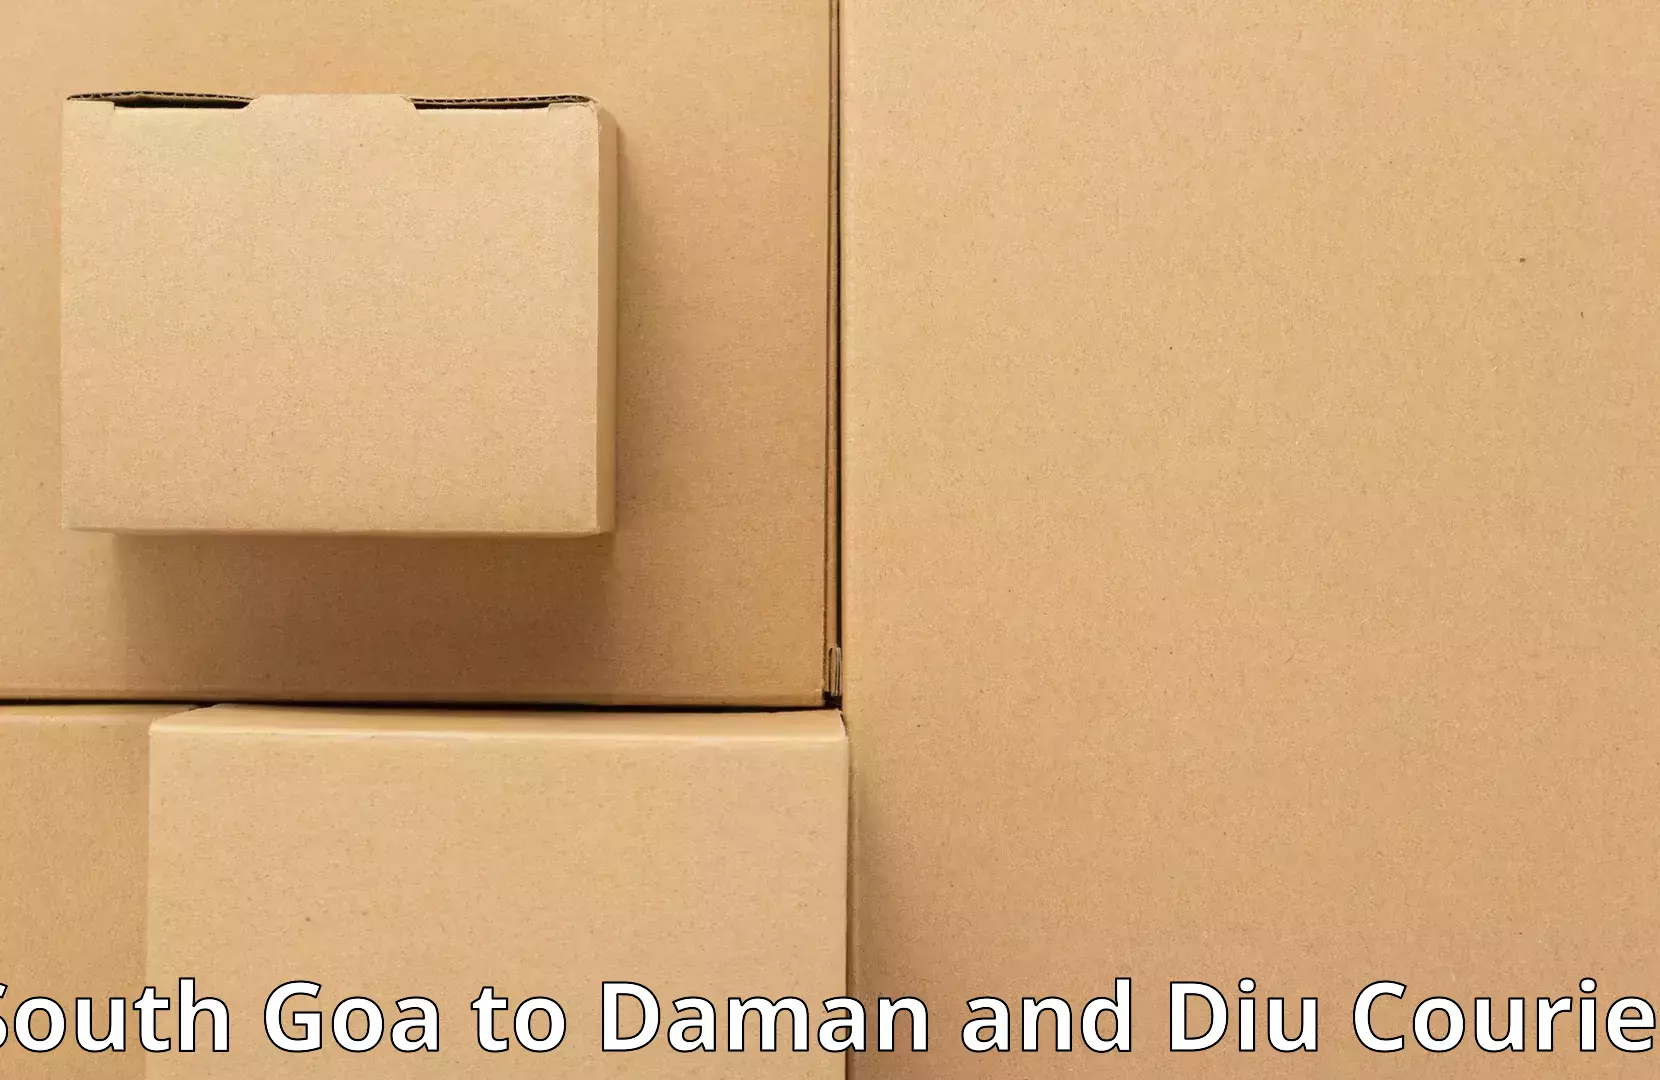 Efficient household movers South Goa to Daman